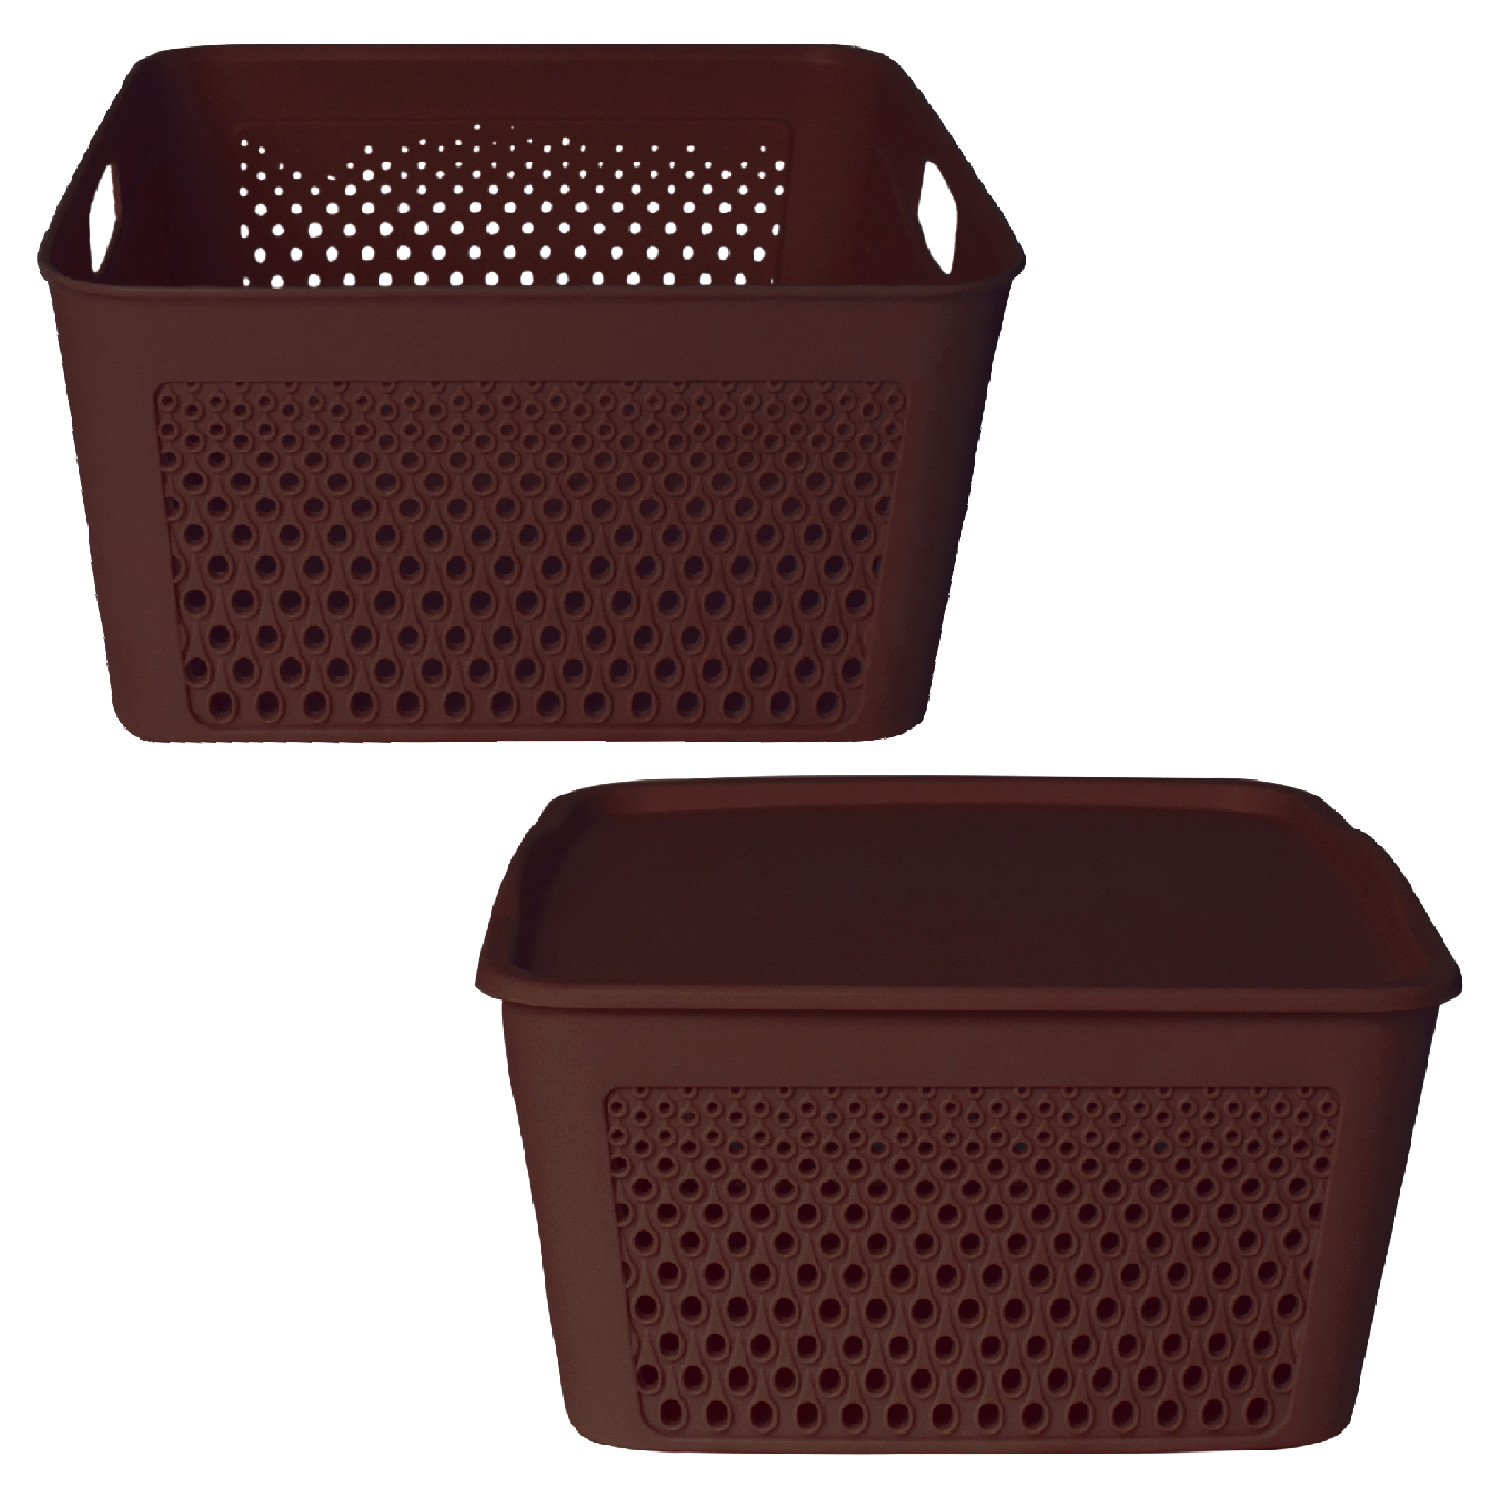 Kuber Industries Netted Design Unbreakable Multipurpose Square Shape Plastic Storage Baskets with lid Small Pack of 2 (Brown)